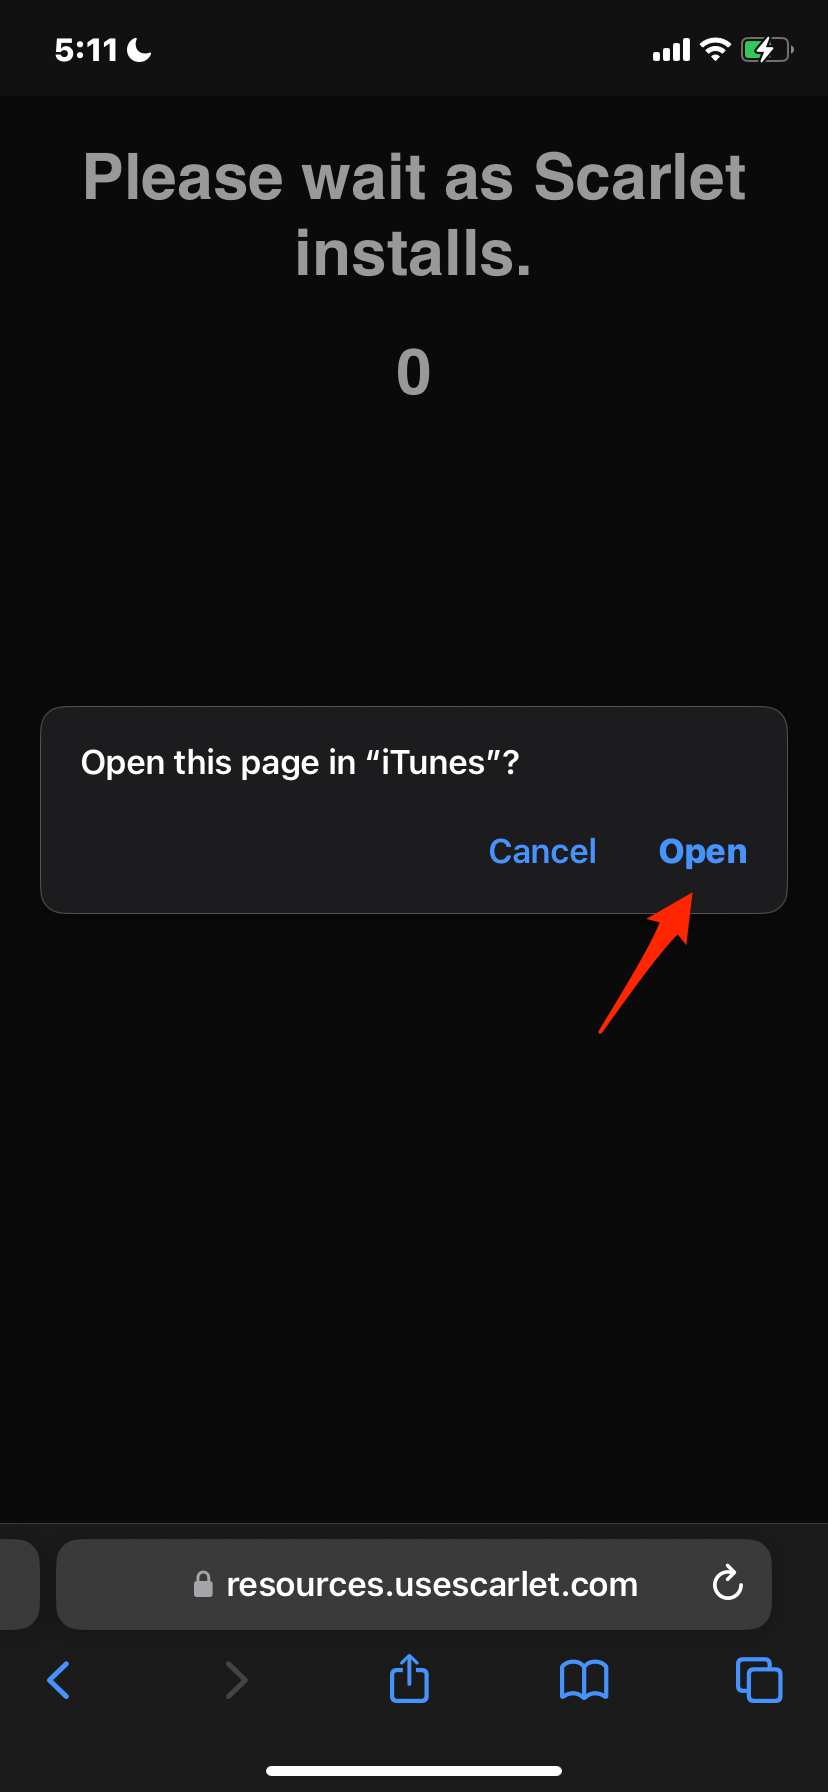 Open_this_page_in_itunes